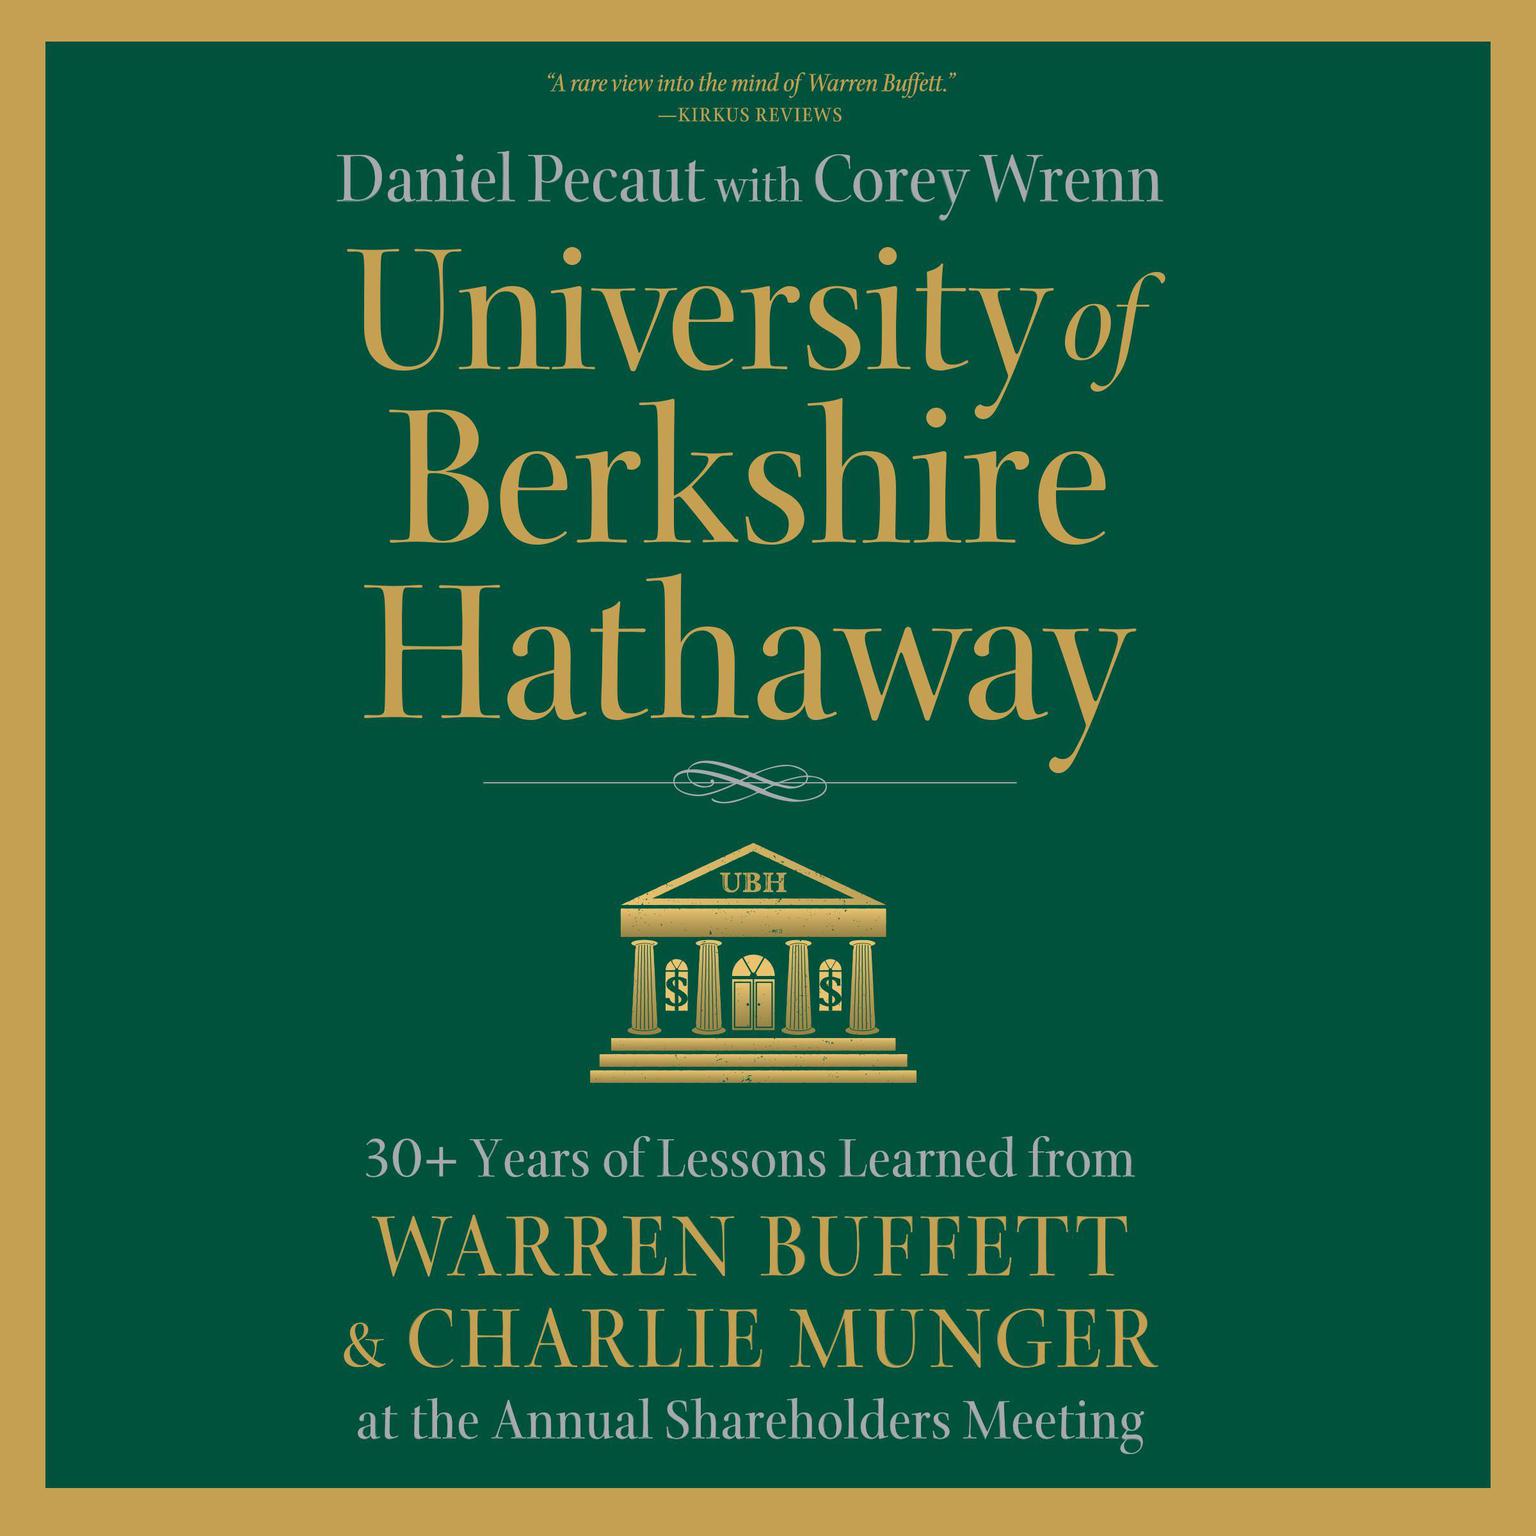 University of Berkshire Hathaway: 30 Years of Lessons Learned from Warren Buffett & Charlie Munger at the Annual Shareholders Meeting Audiobook, by Daniel Pecaut